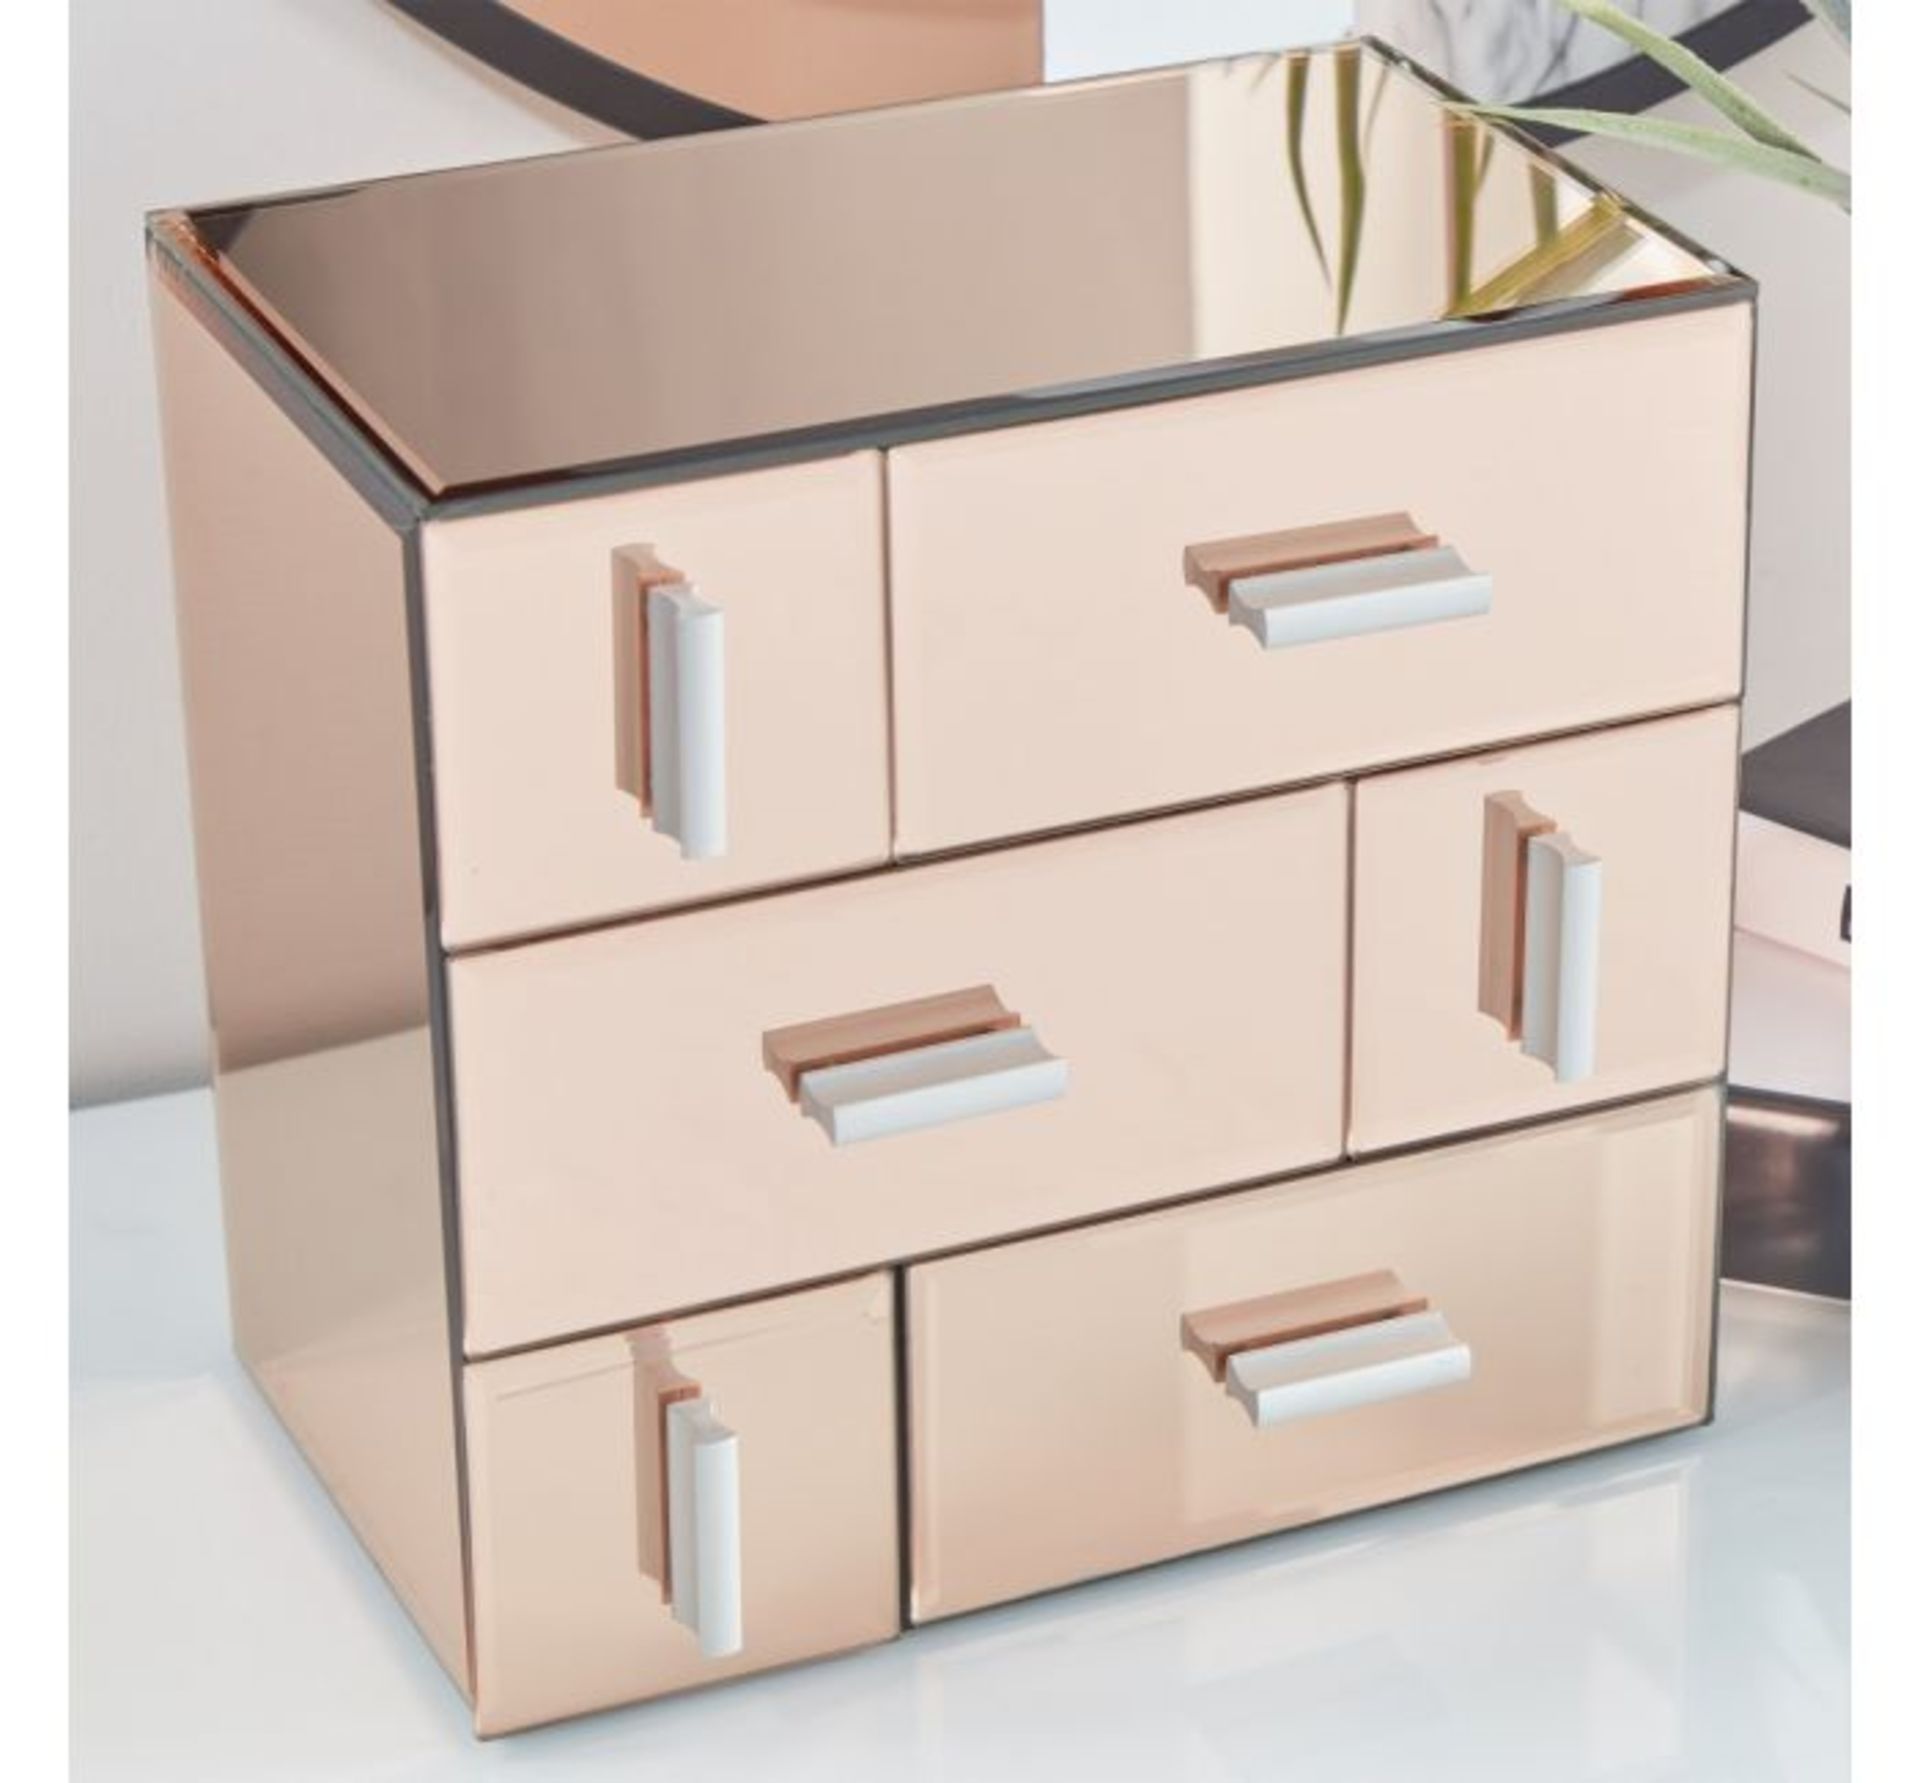 (X14) 1x Rose Gold 6 Drawer Mirrored Organiser. Make being organised easy with this super stylish - Image 3 of 3